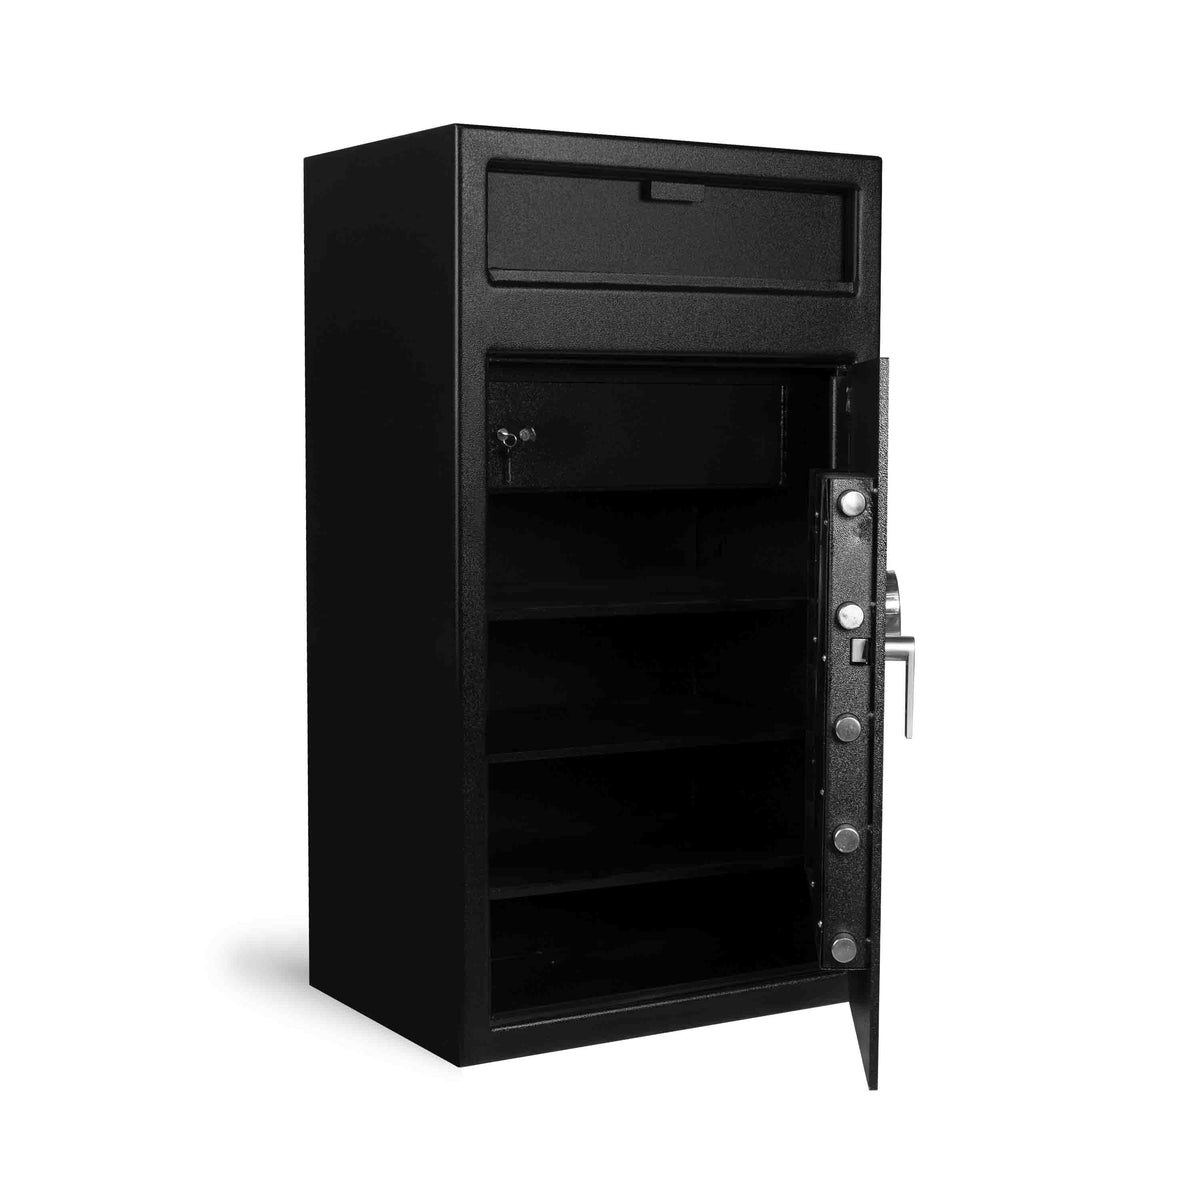 Pacific Safe FL5028MK2 Front Load Depository Safe with Internal Compartment Door Open